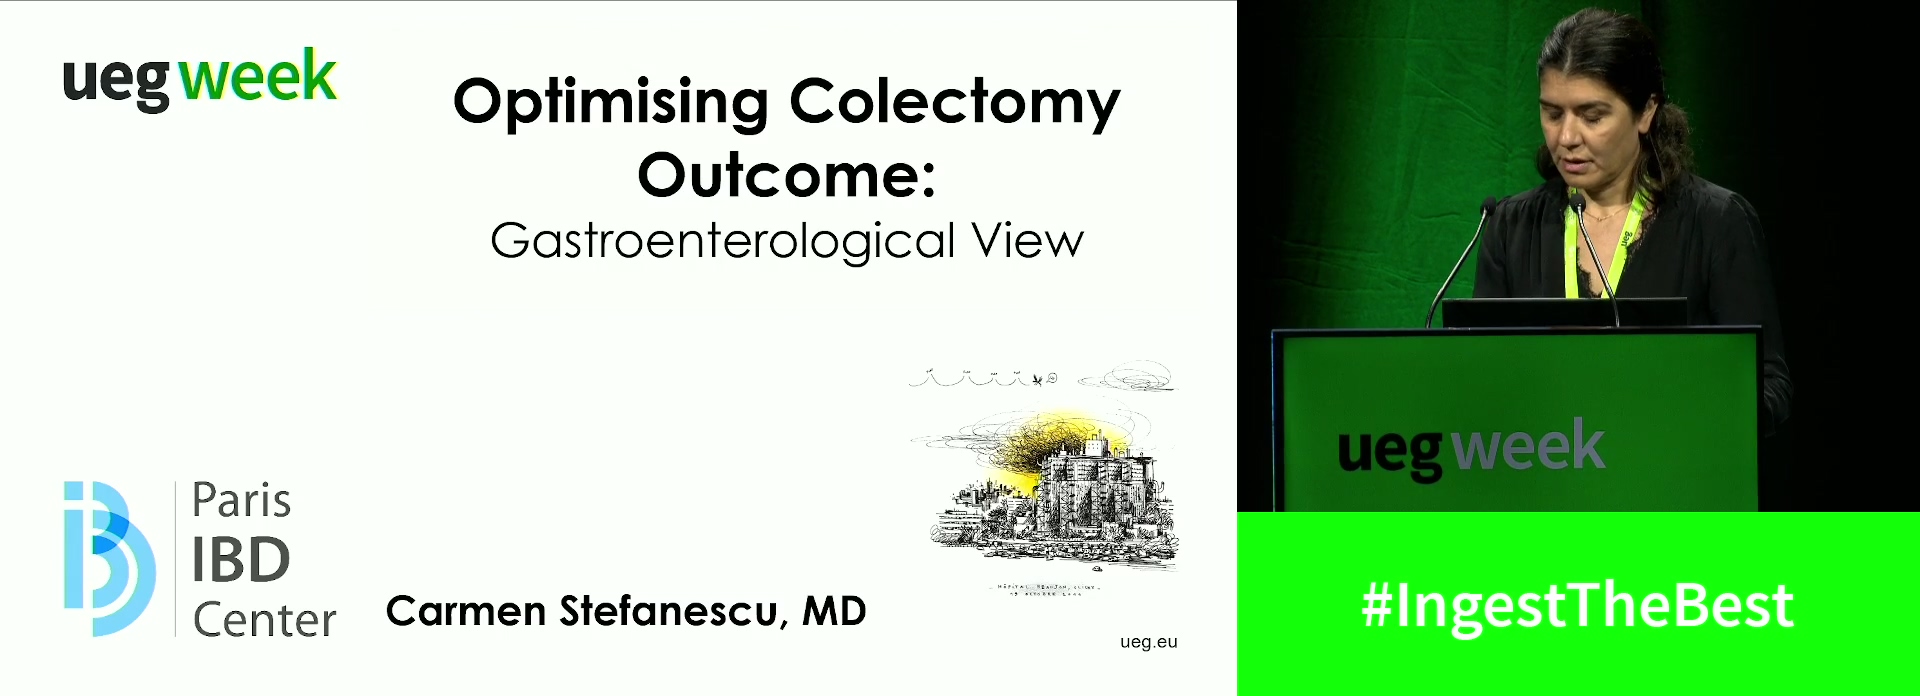 Optimising colectomy outcome: Gastroenterological and surgical view